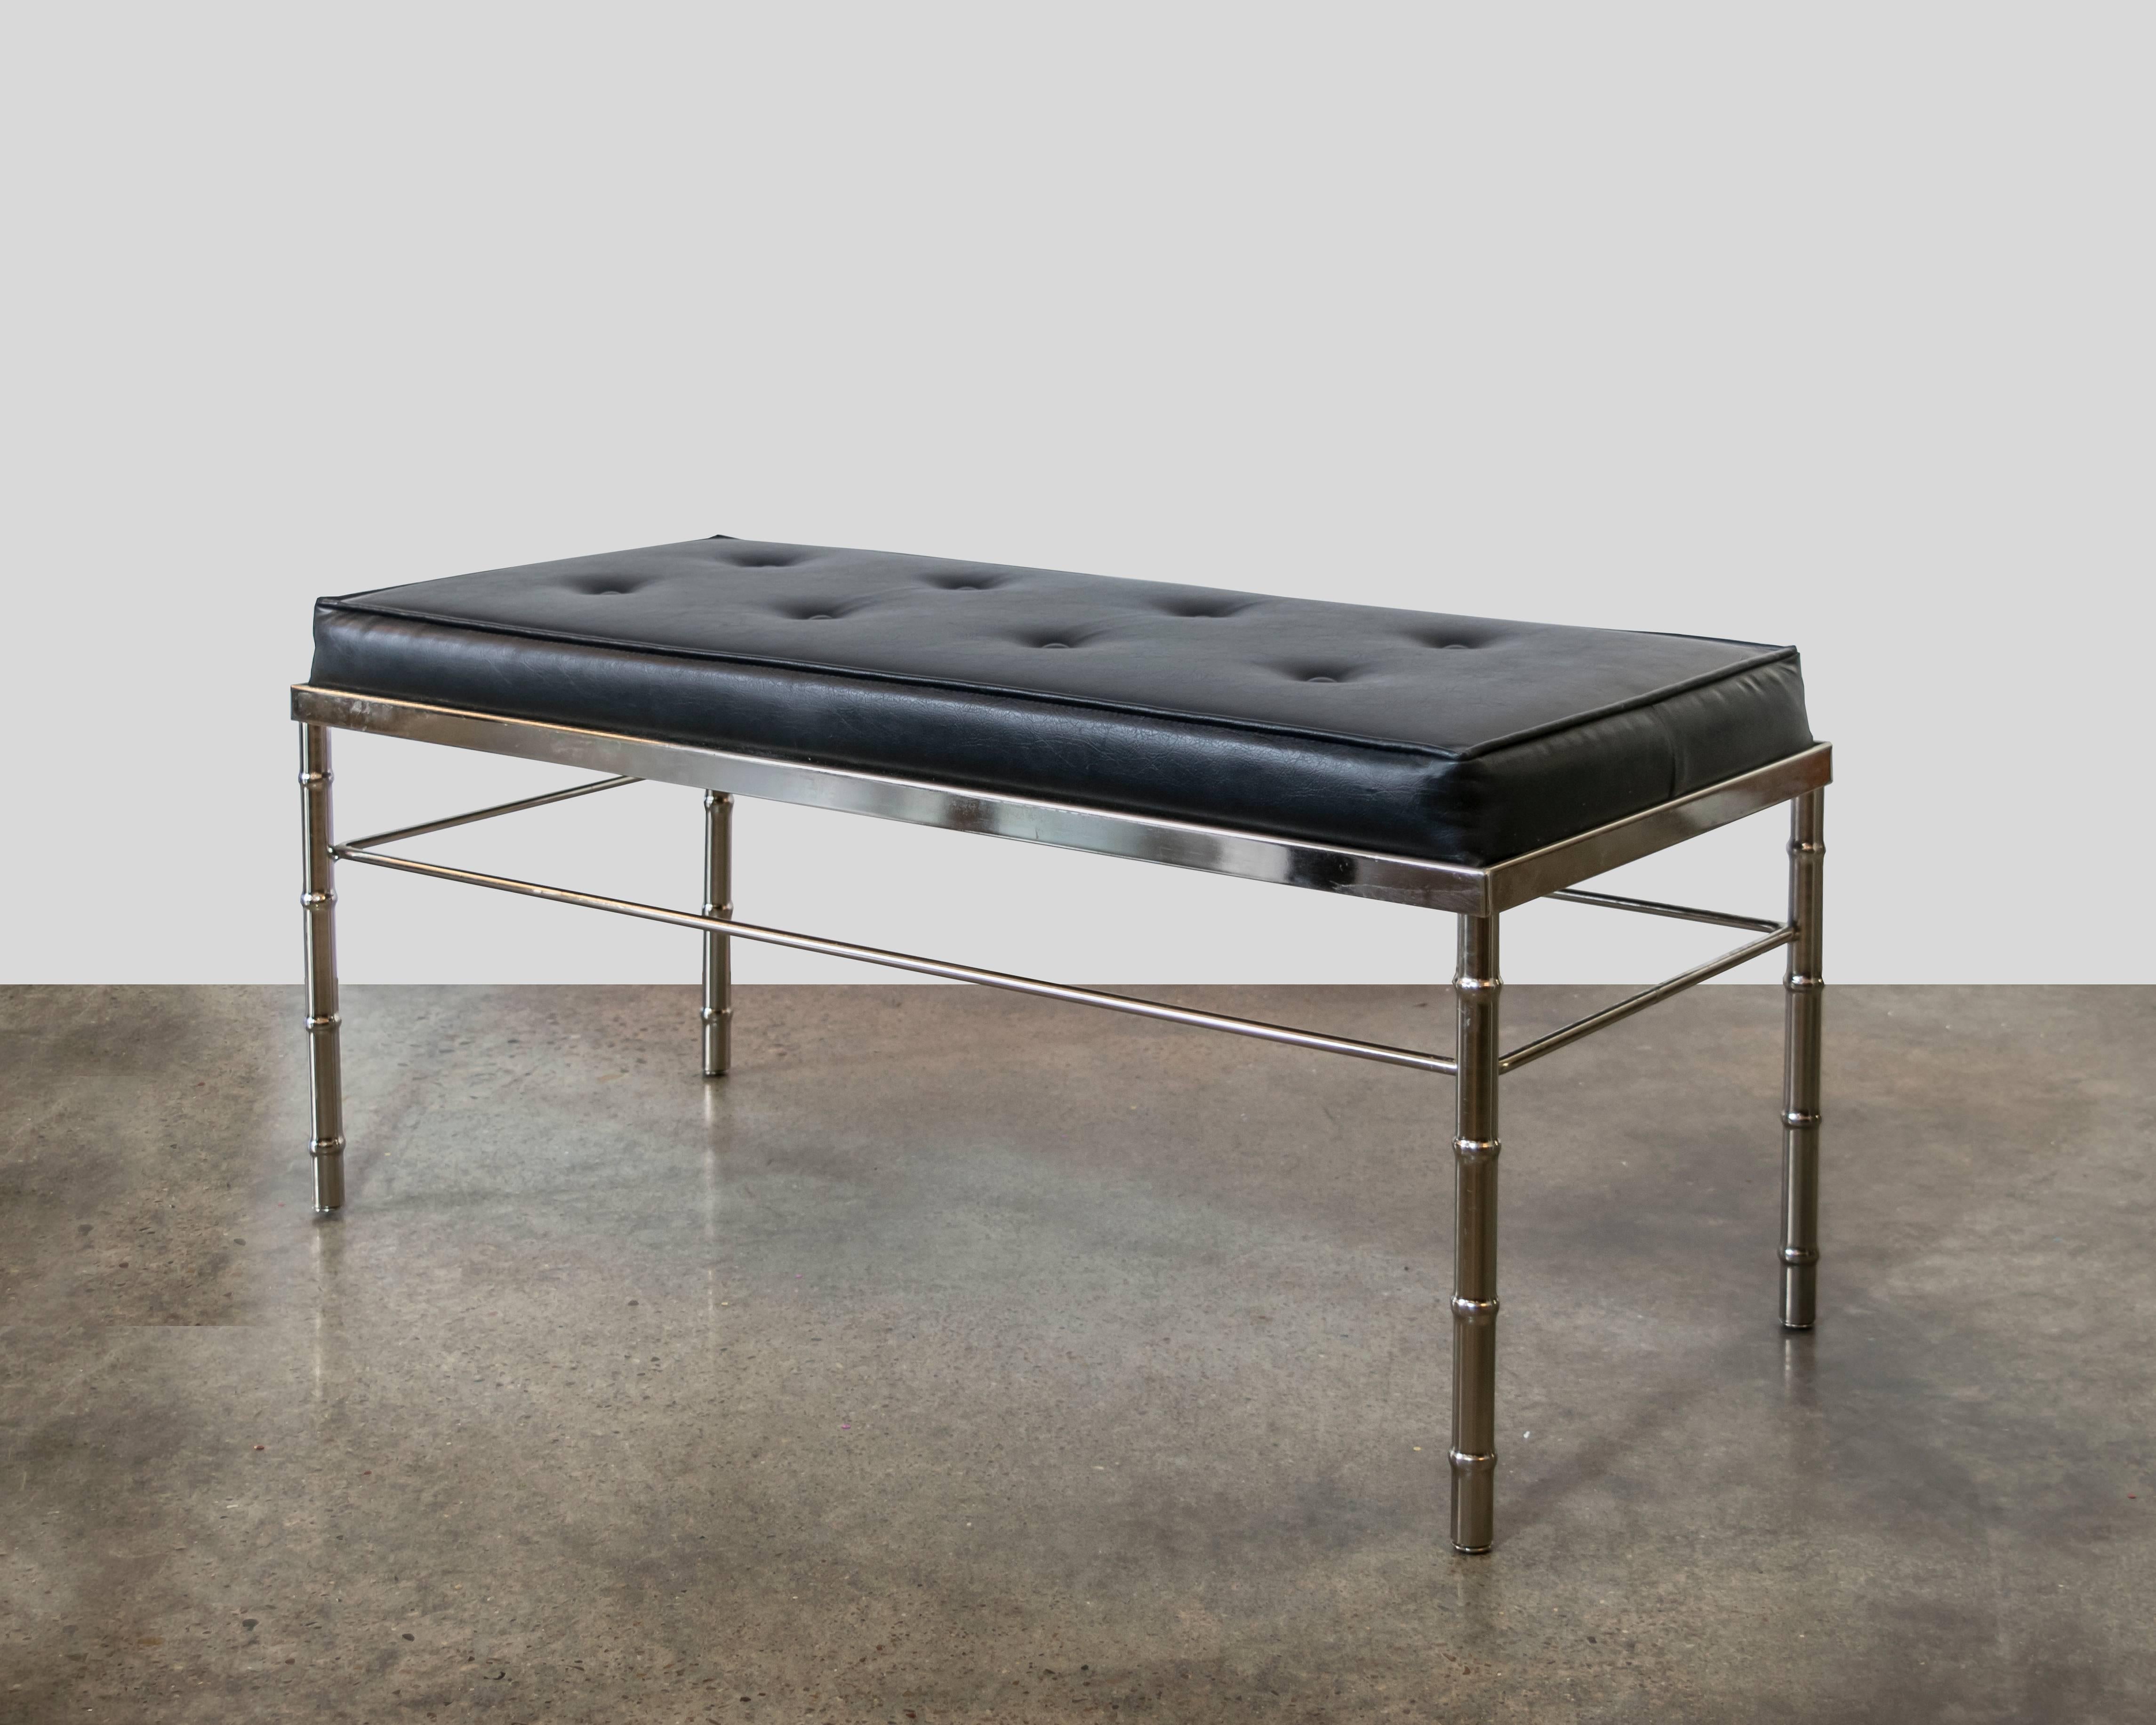 This is such an unusual and lovely faux bamboo and black leather bench by George Koch Sons. It's a perfect bench for an entryway or at the end of a bed.